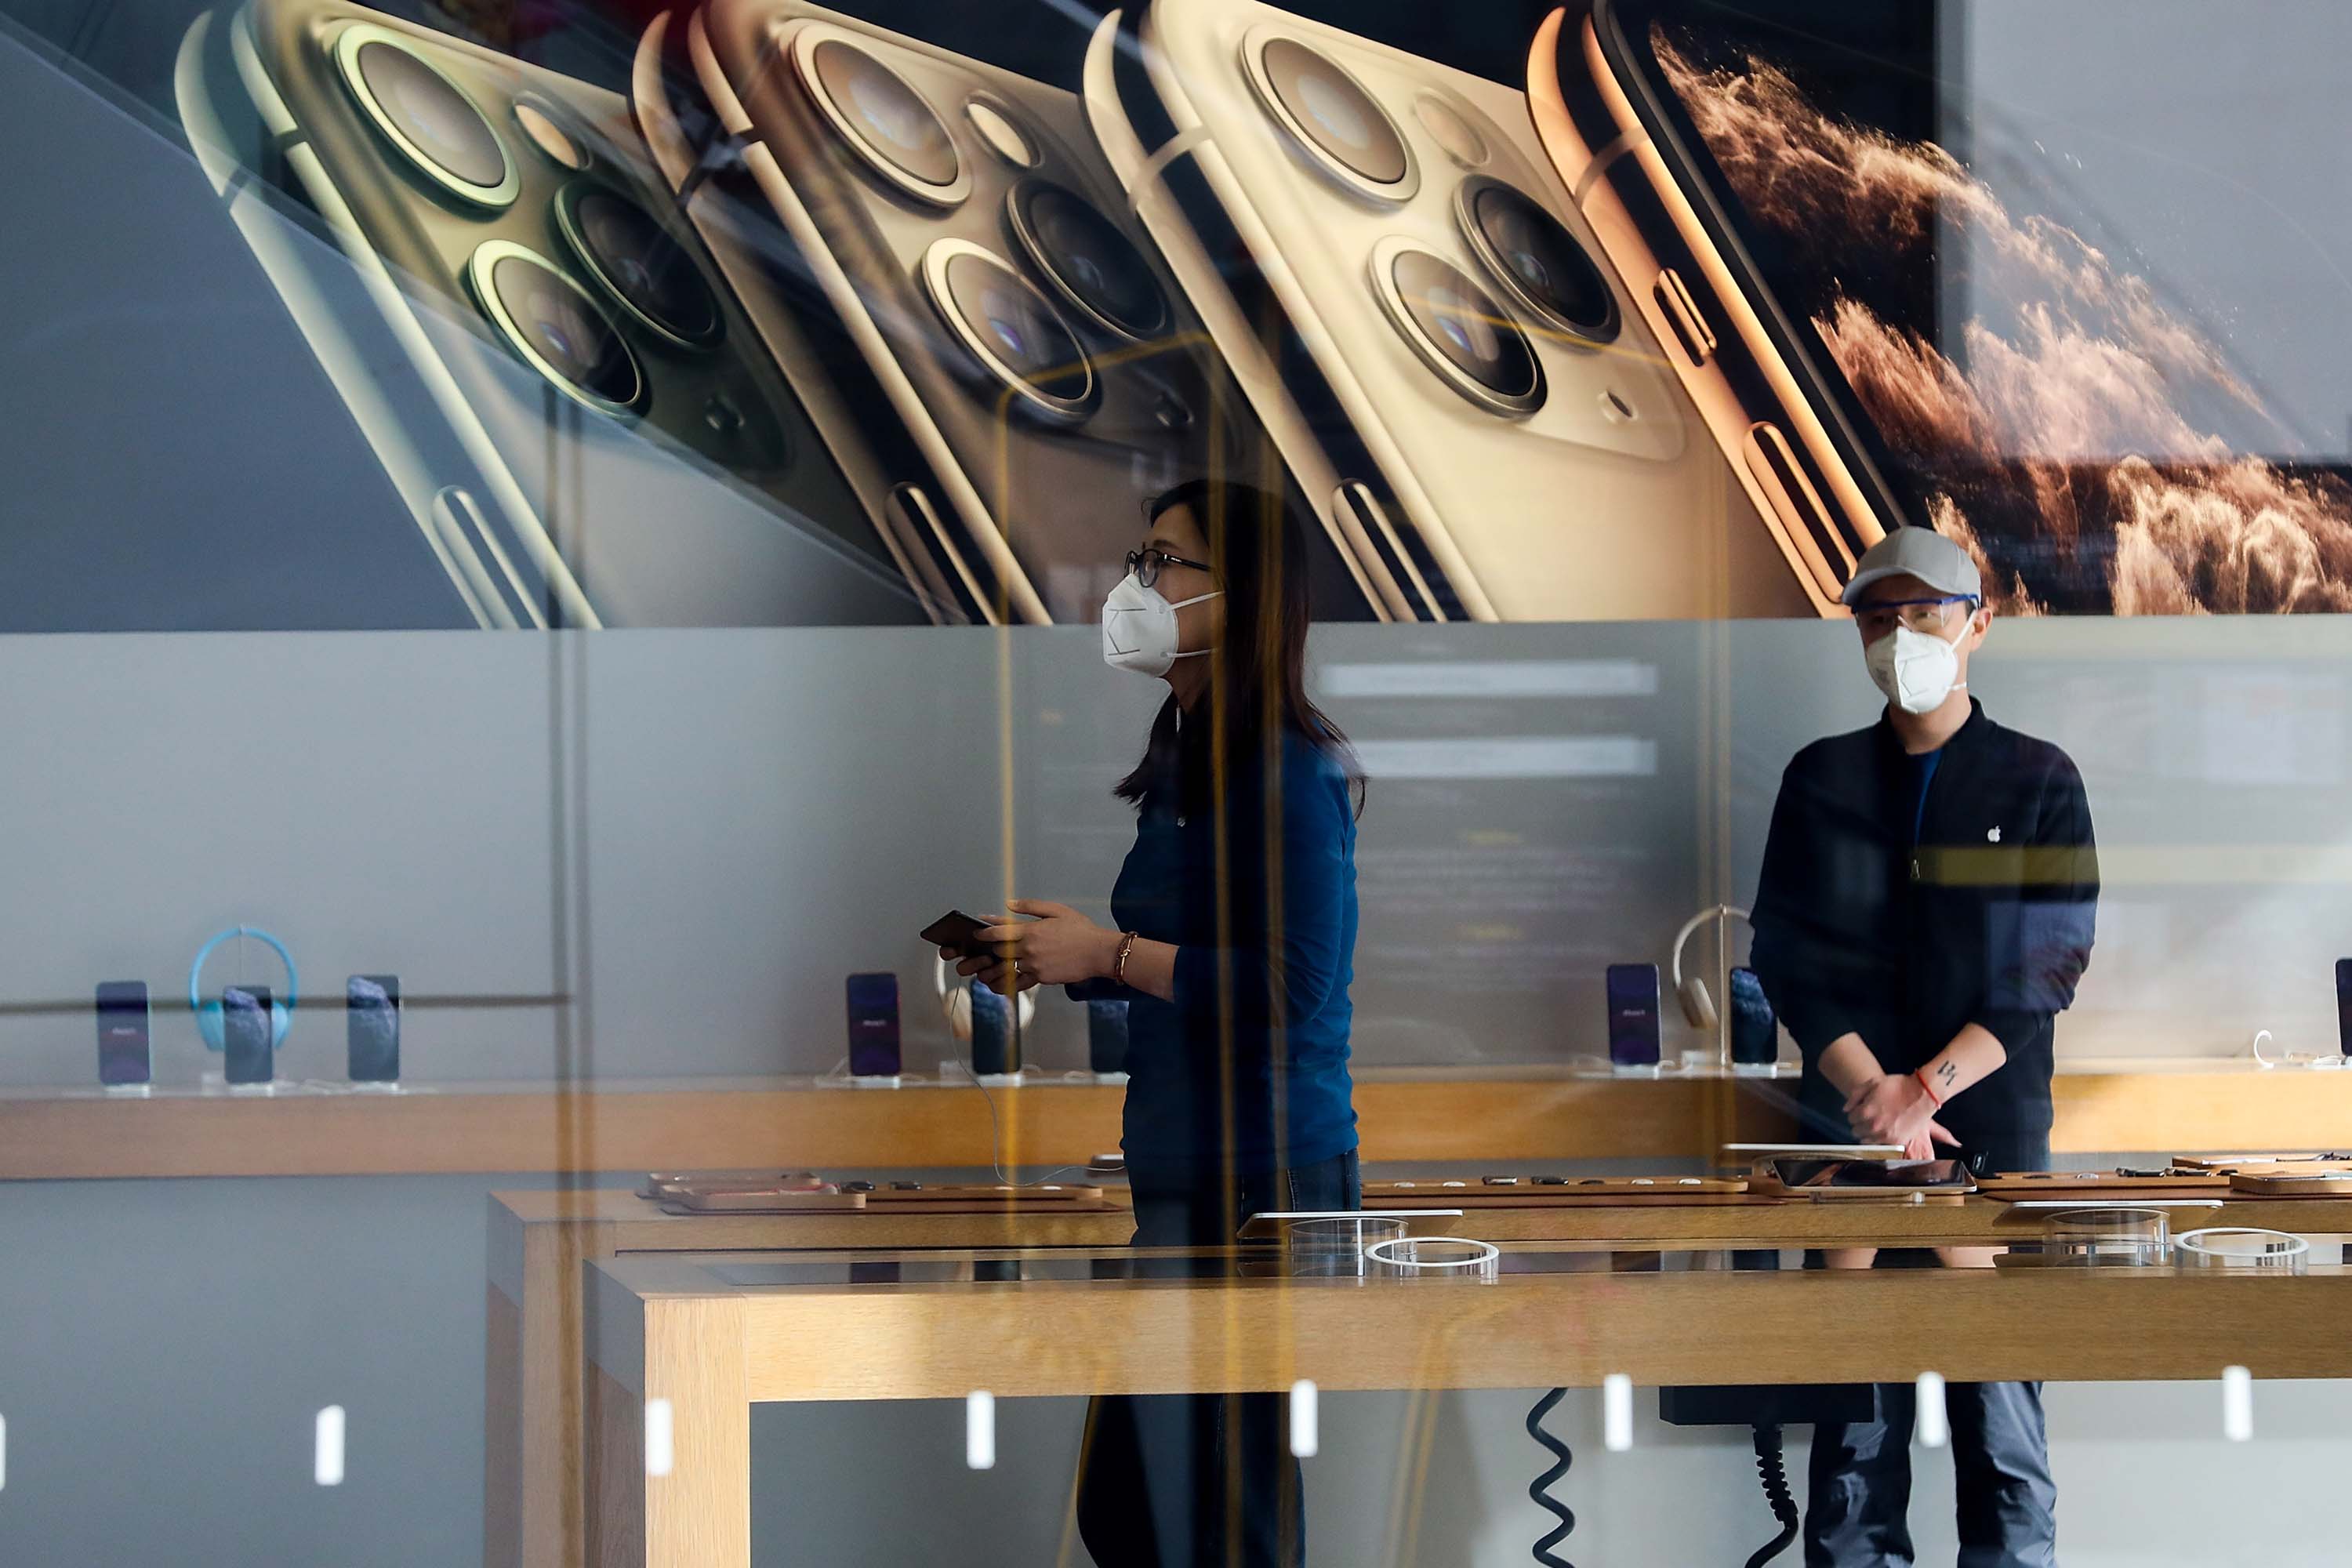 Employees wear face masks at an Apple Store in Beijing on Monday.